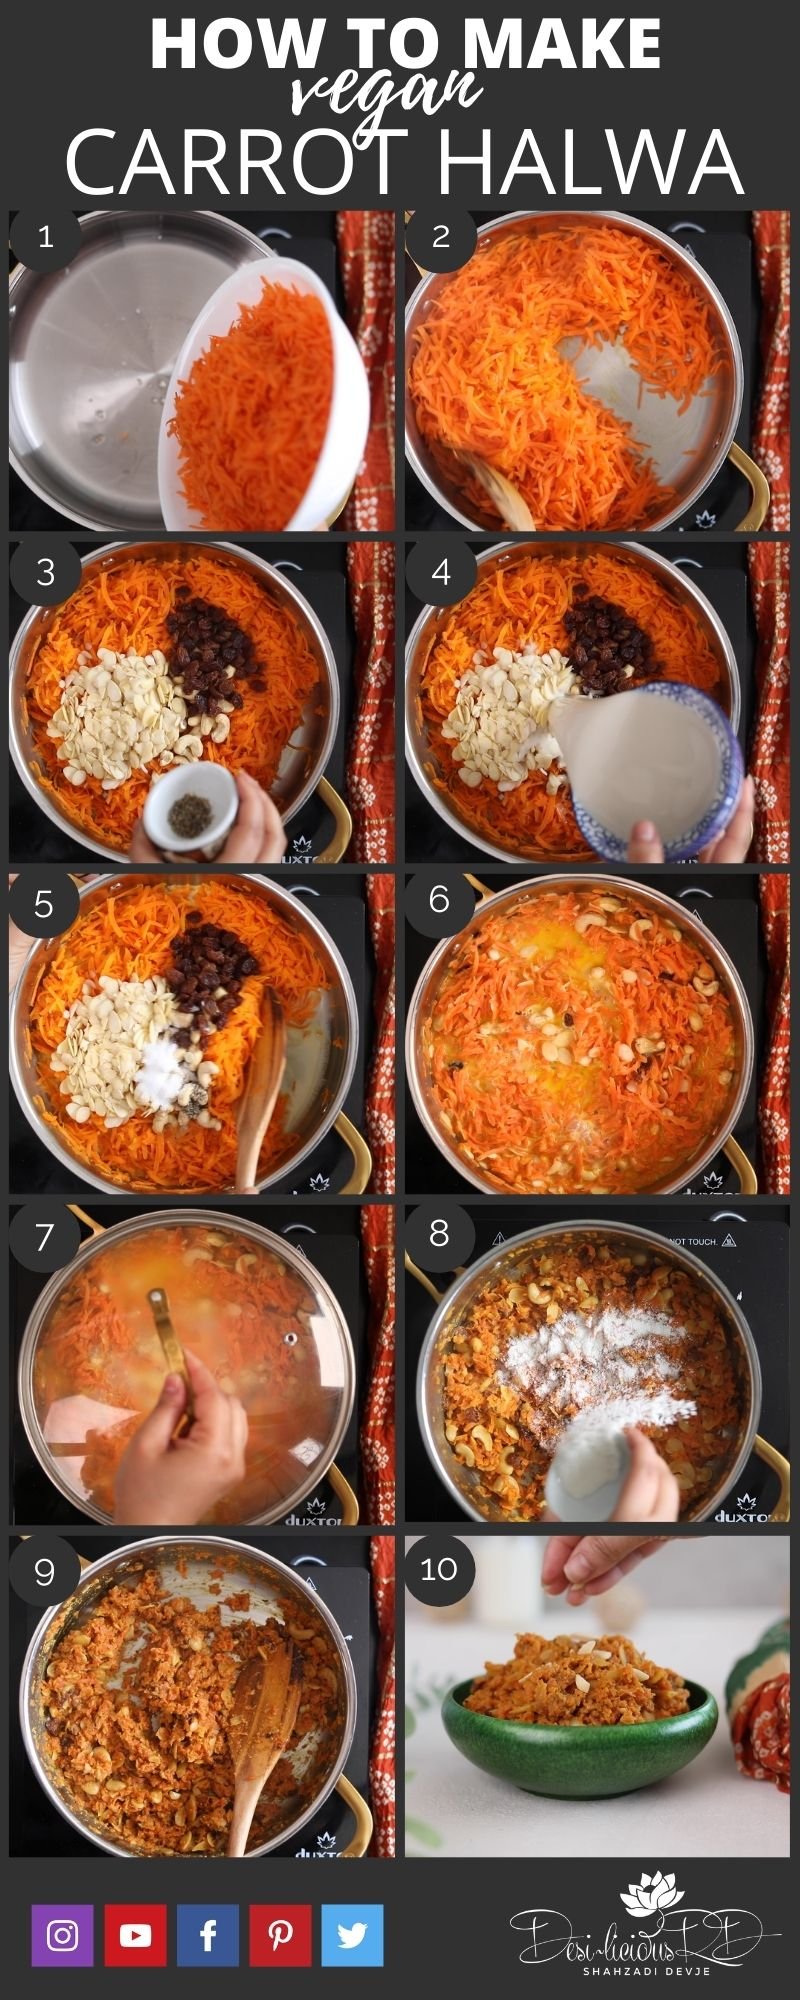 step by step images (10) of how to make carrot halwa in a pan